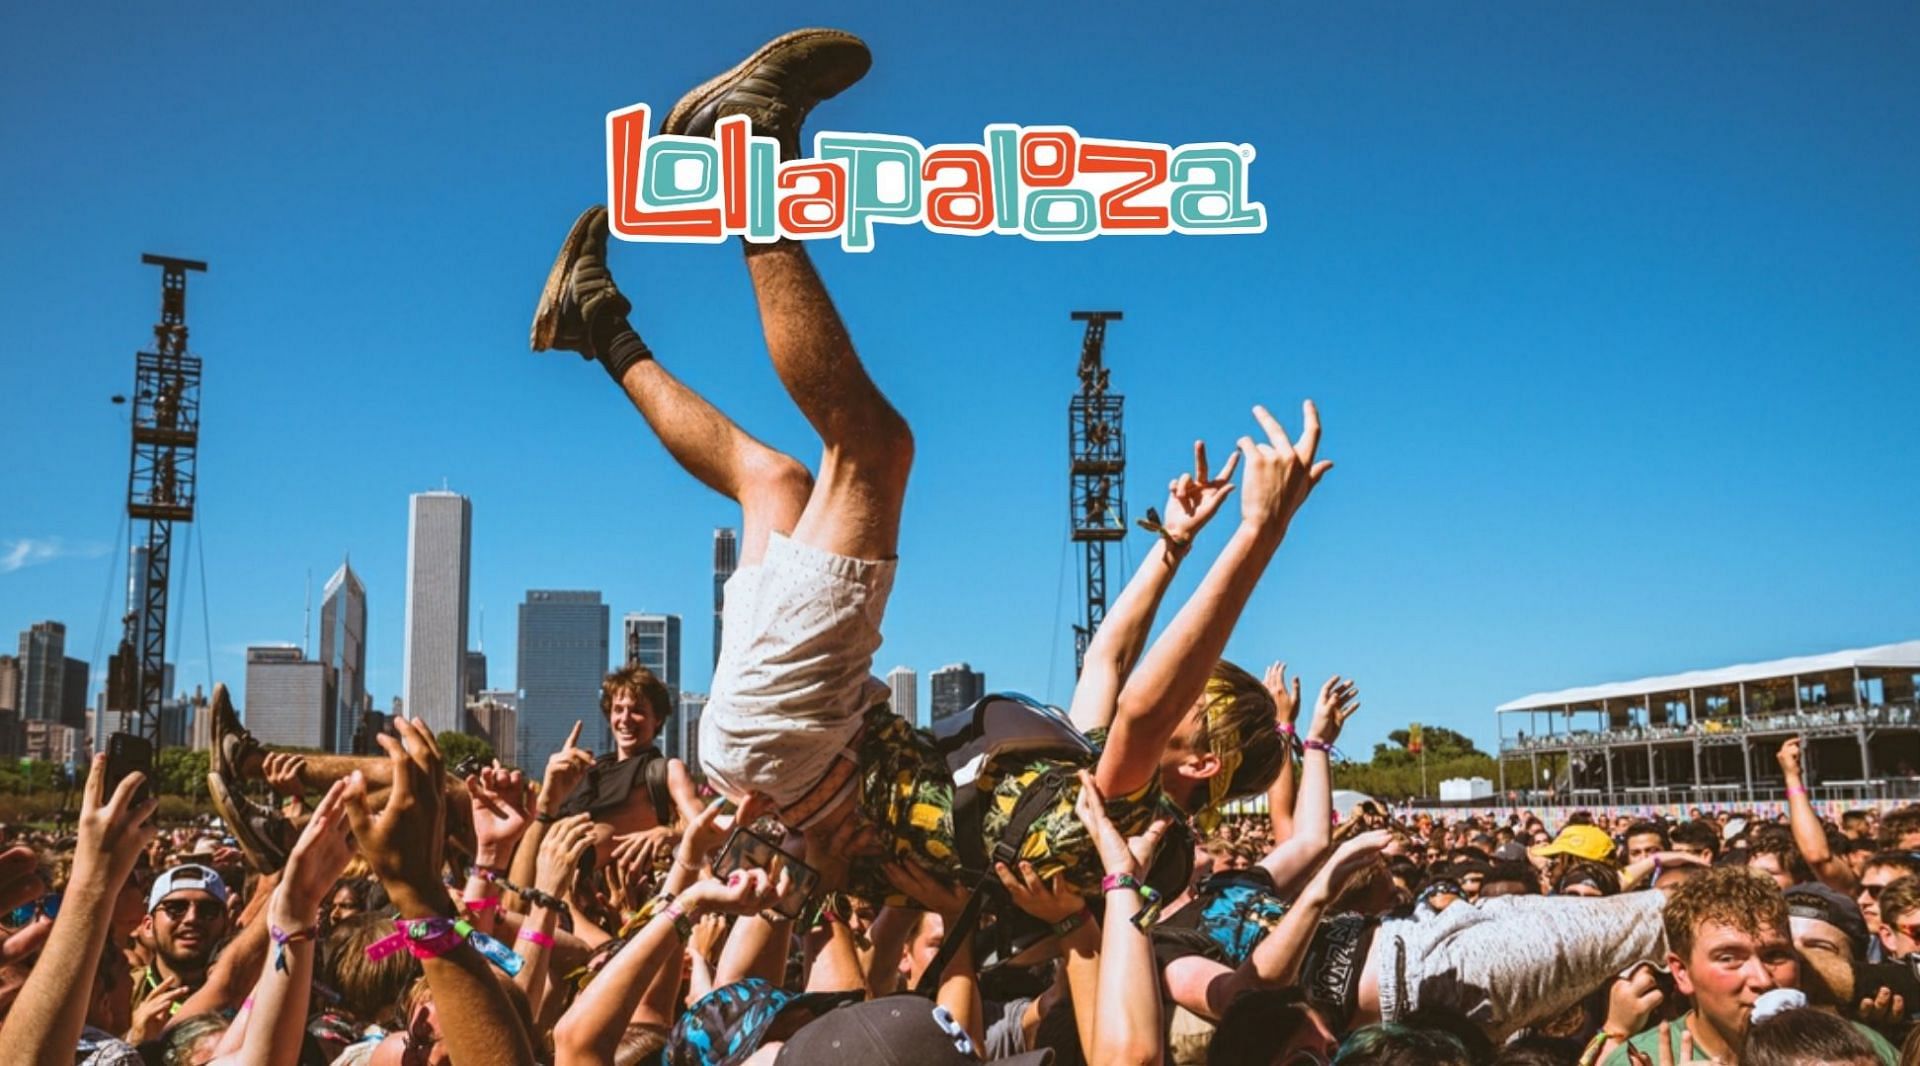 Lollapalooza 2022 Lineup Revealed: J. Cole, Lil Baby, Doja Cat, and More